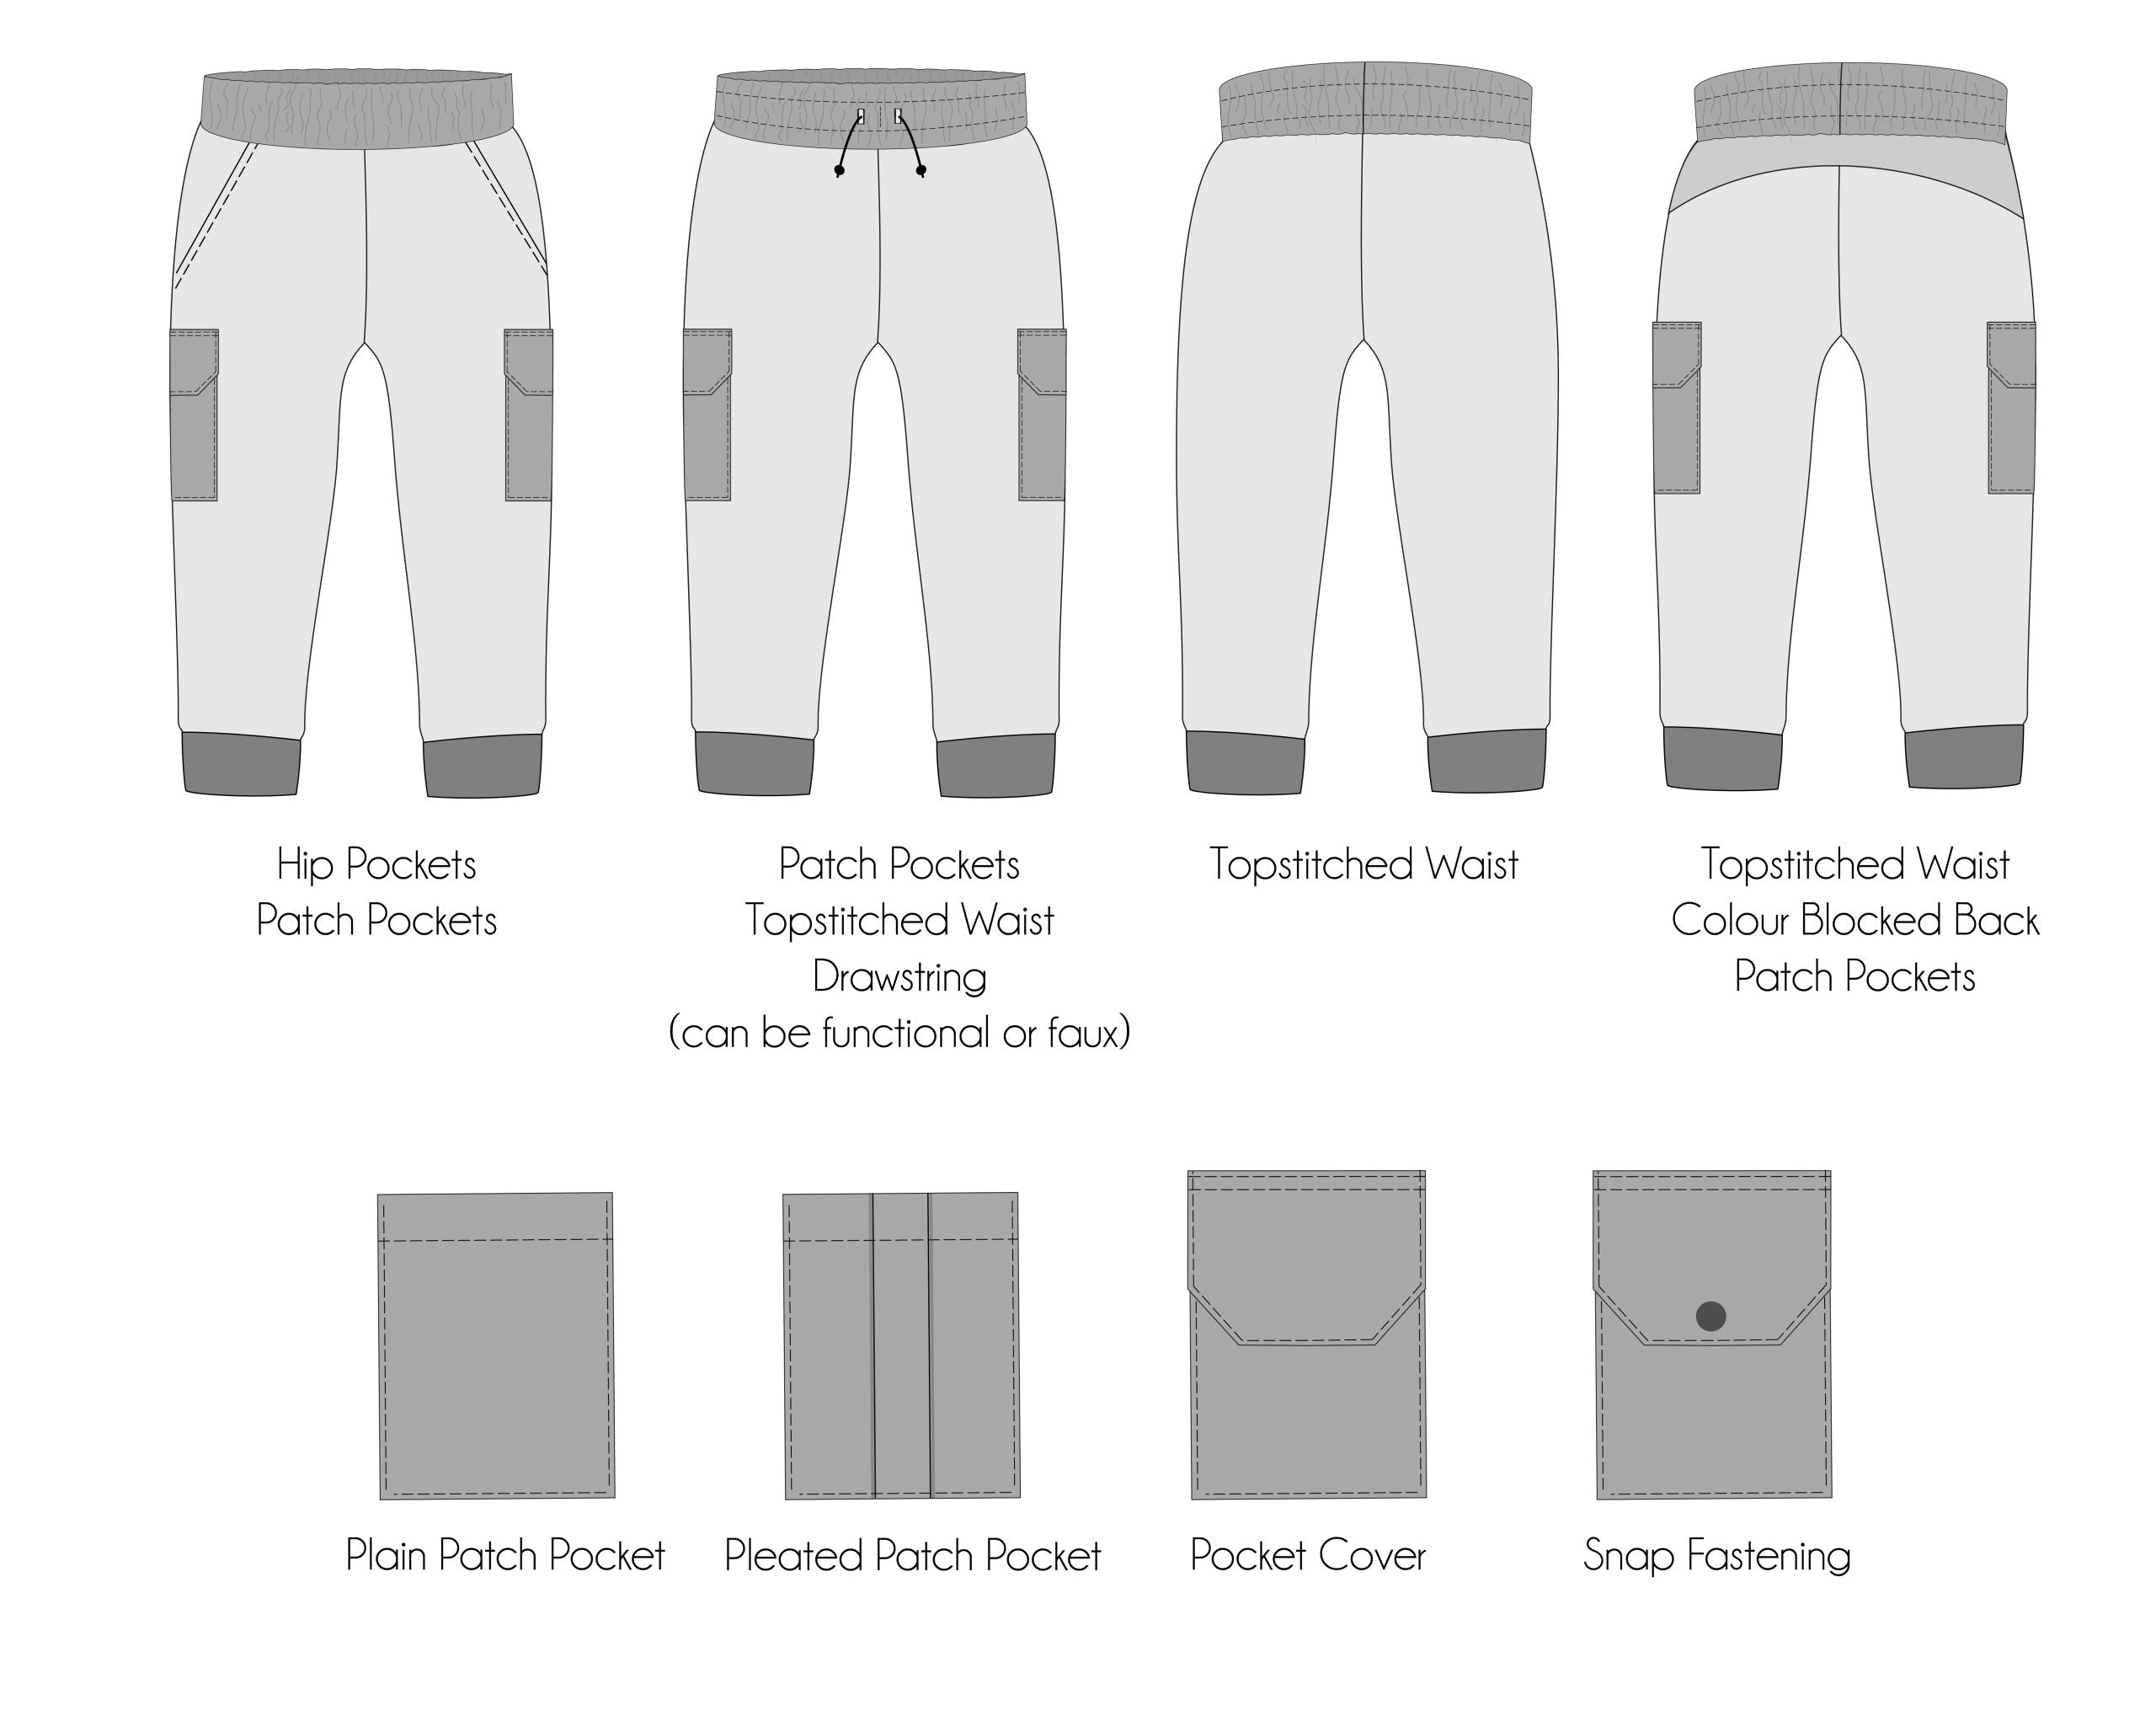 Waves & Wild Baby/Child Field Trip Joggers